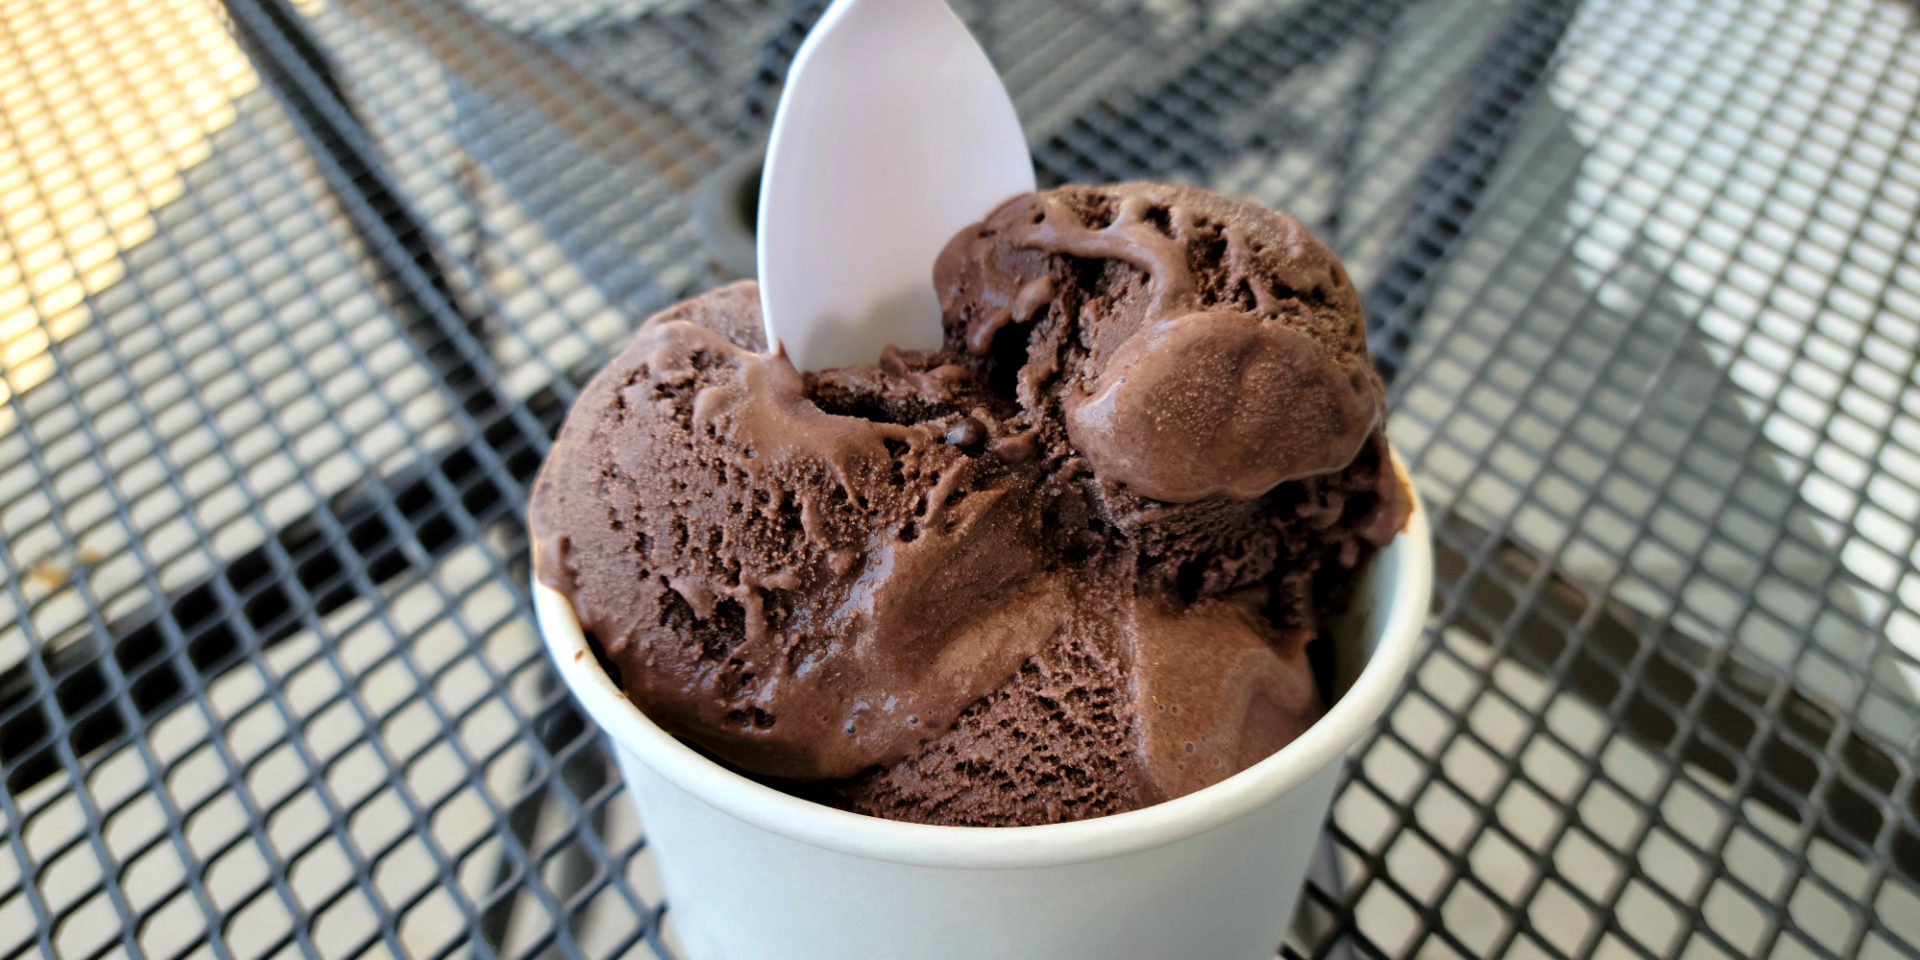 Chocolate ice cream densely packed into a cup from Grovestone. Photo by Matthew Macomber.